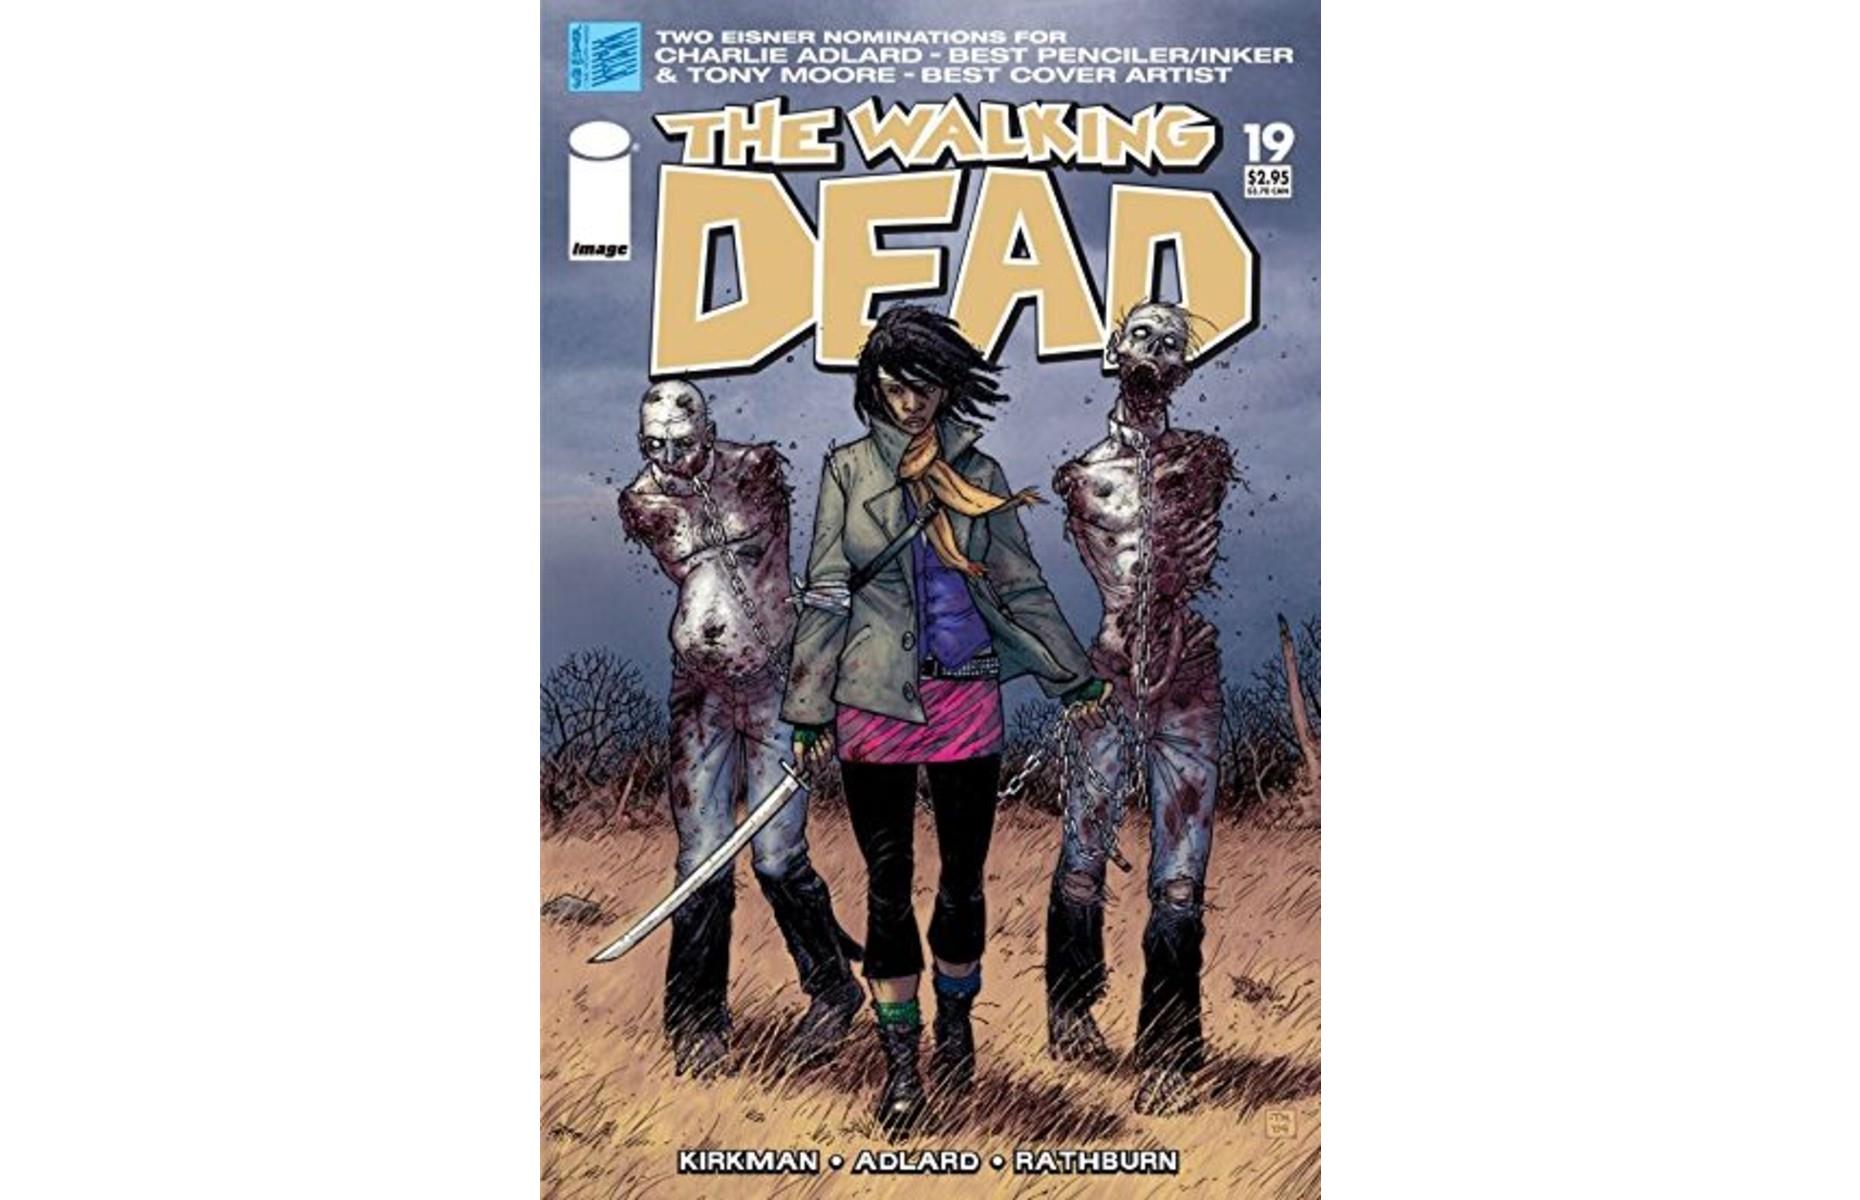 Walking Dead #19: up to £360 ($475)